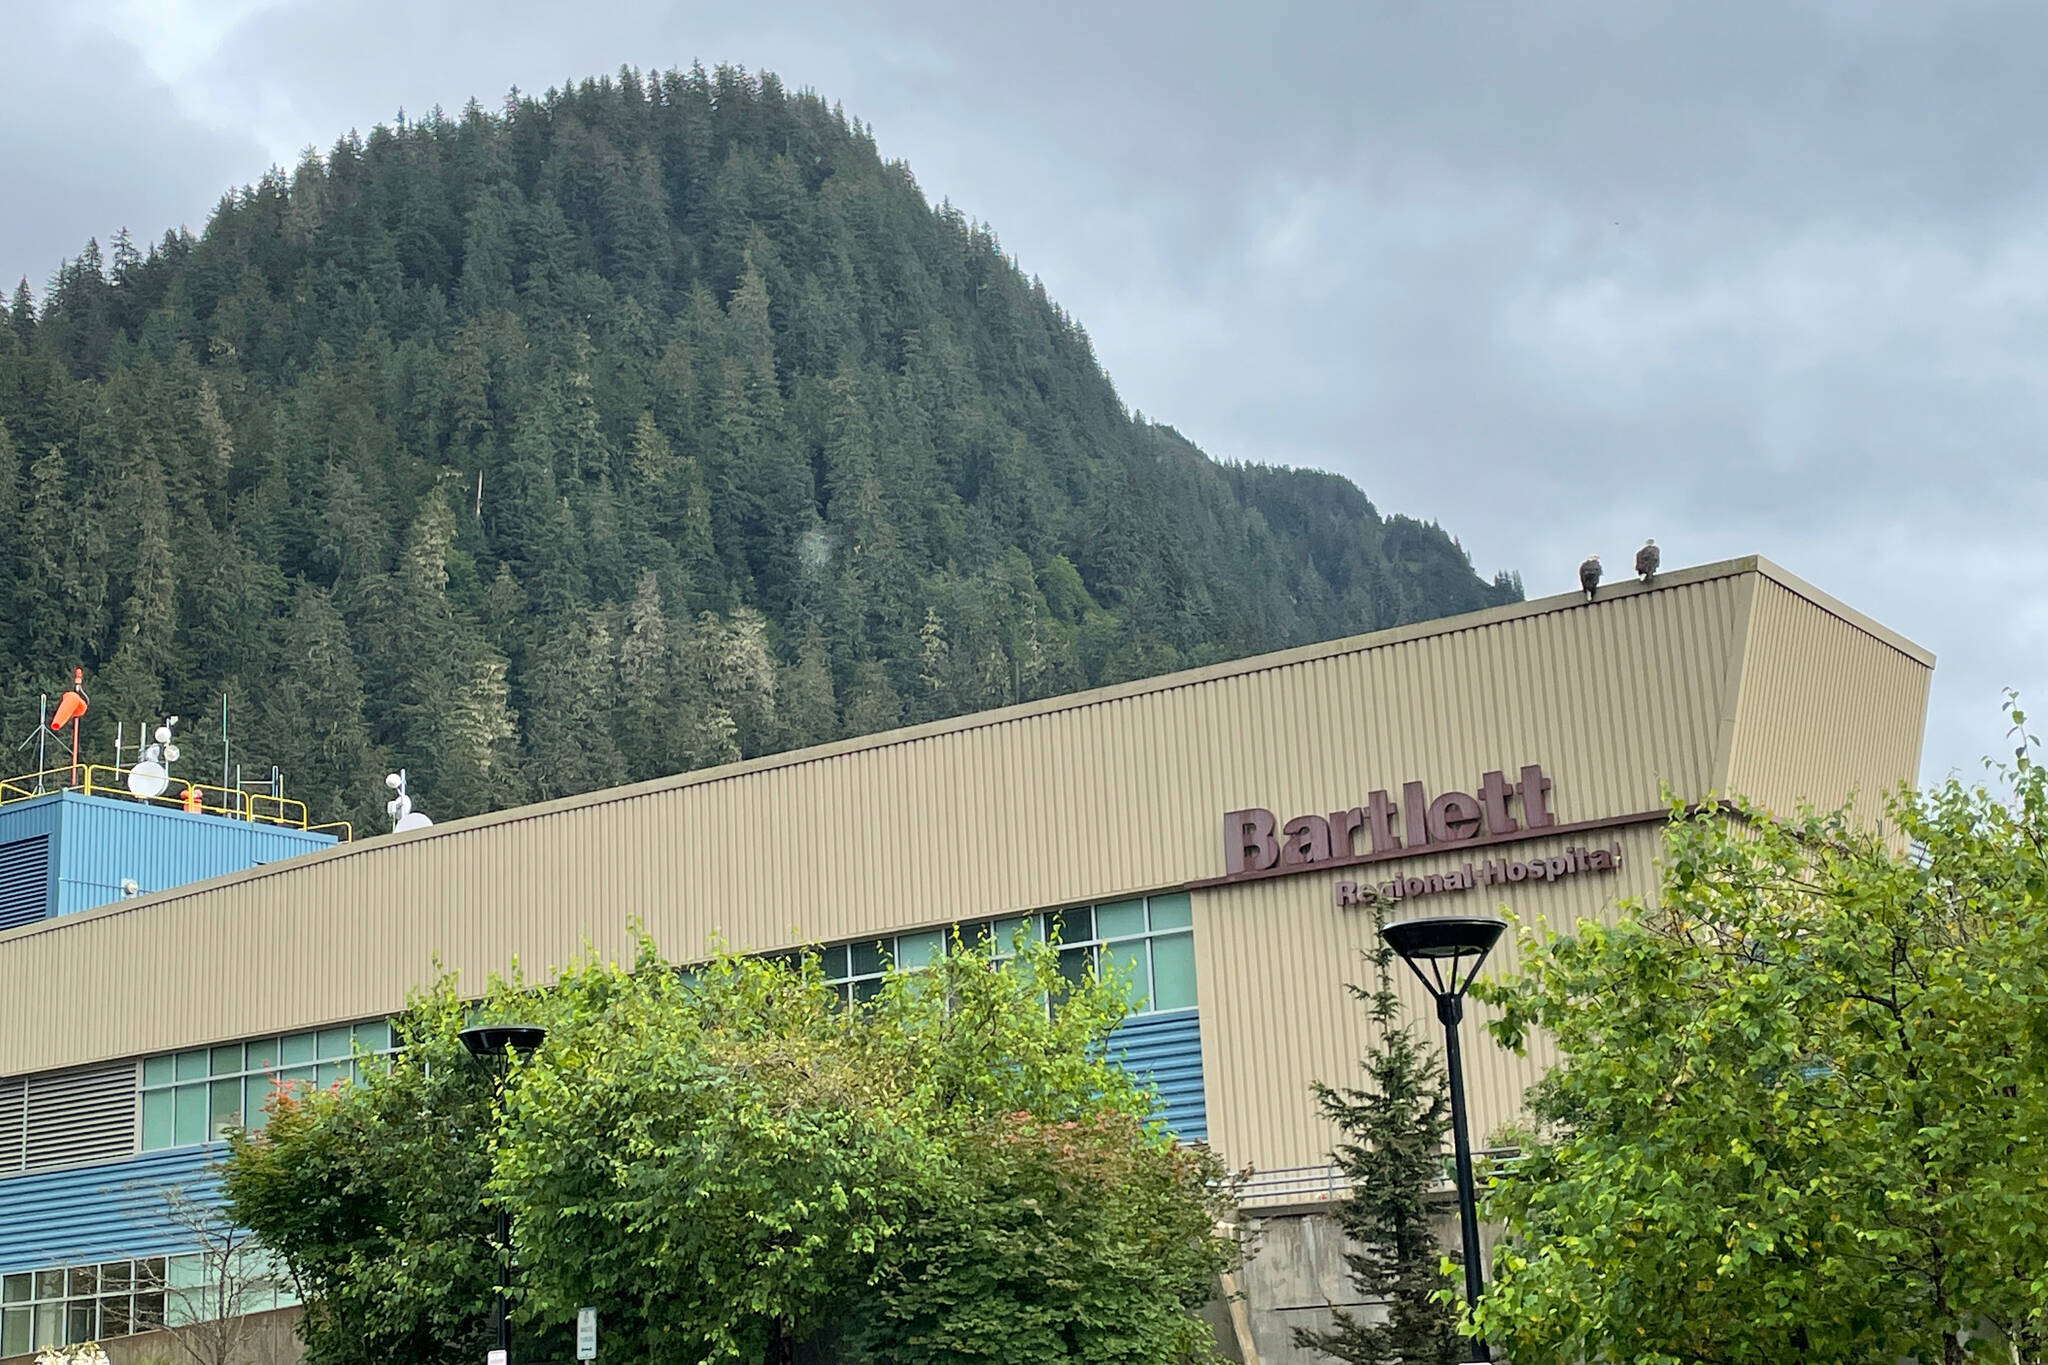 Bartlett Regional Hospital is looking for an interim CEO after Rose Lawhorne resigned from the top job on Saturday, after six months in the position. (Michael S. Lockett / Juneau Empire)